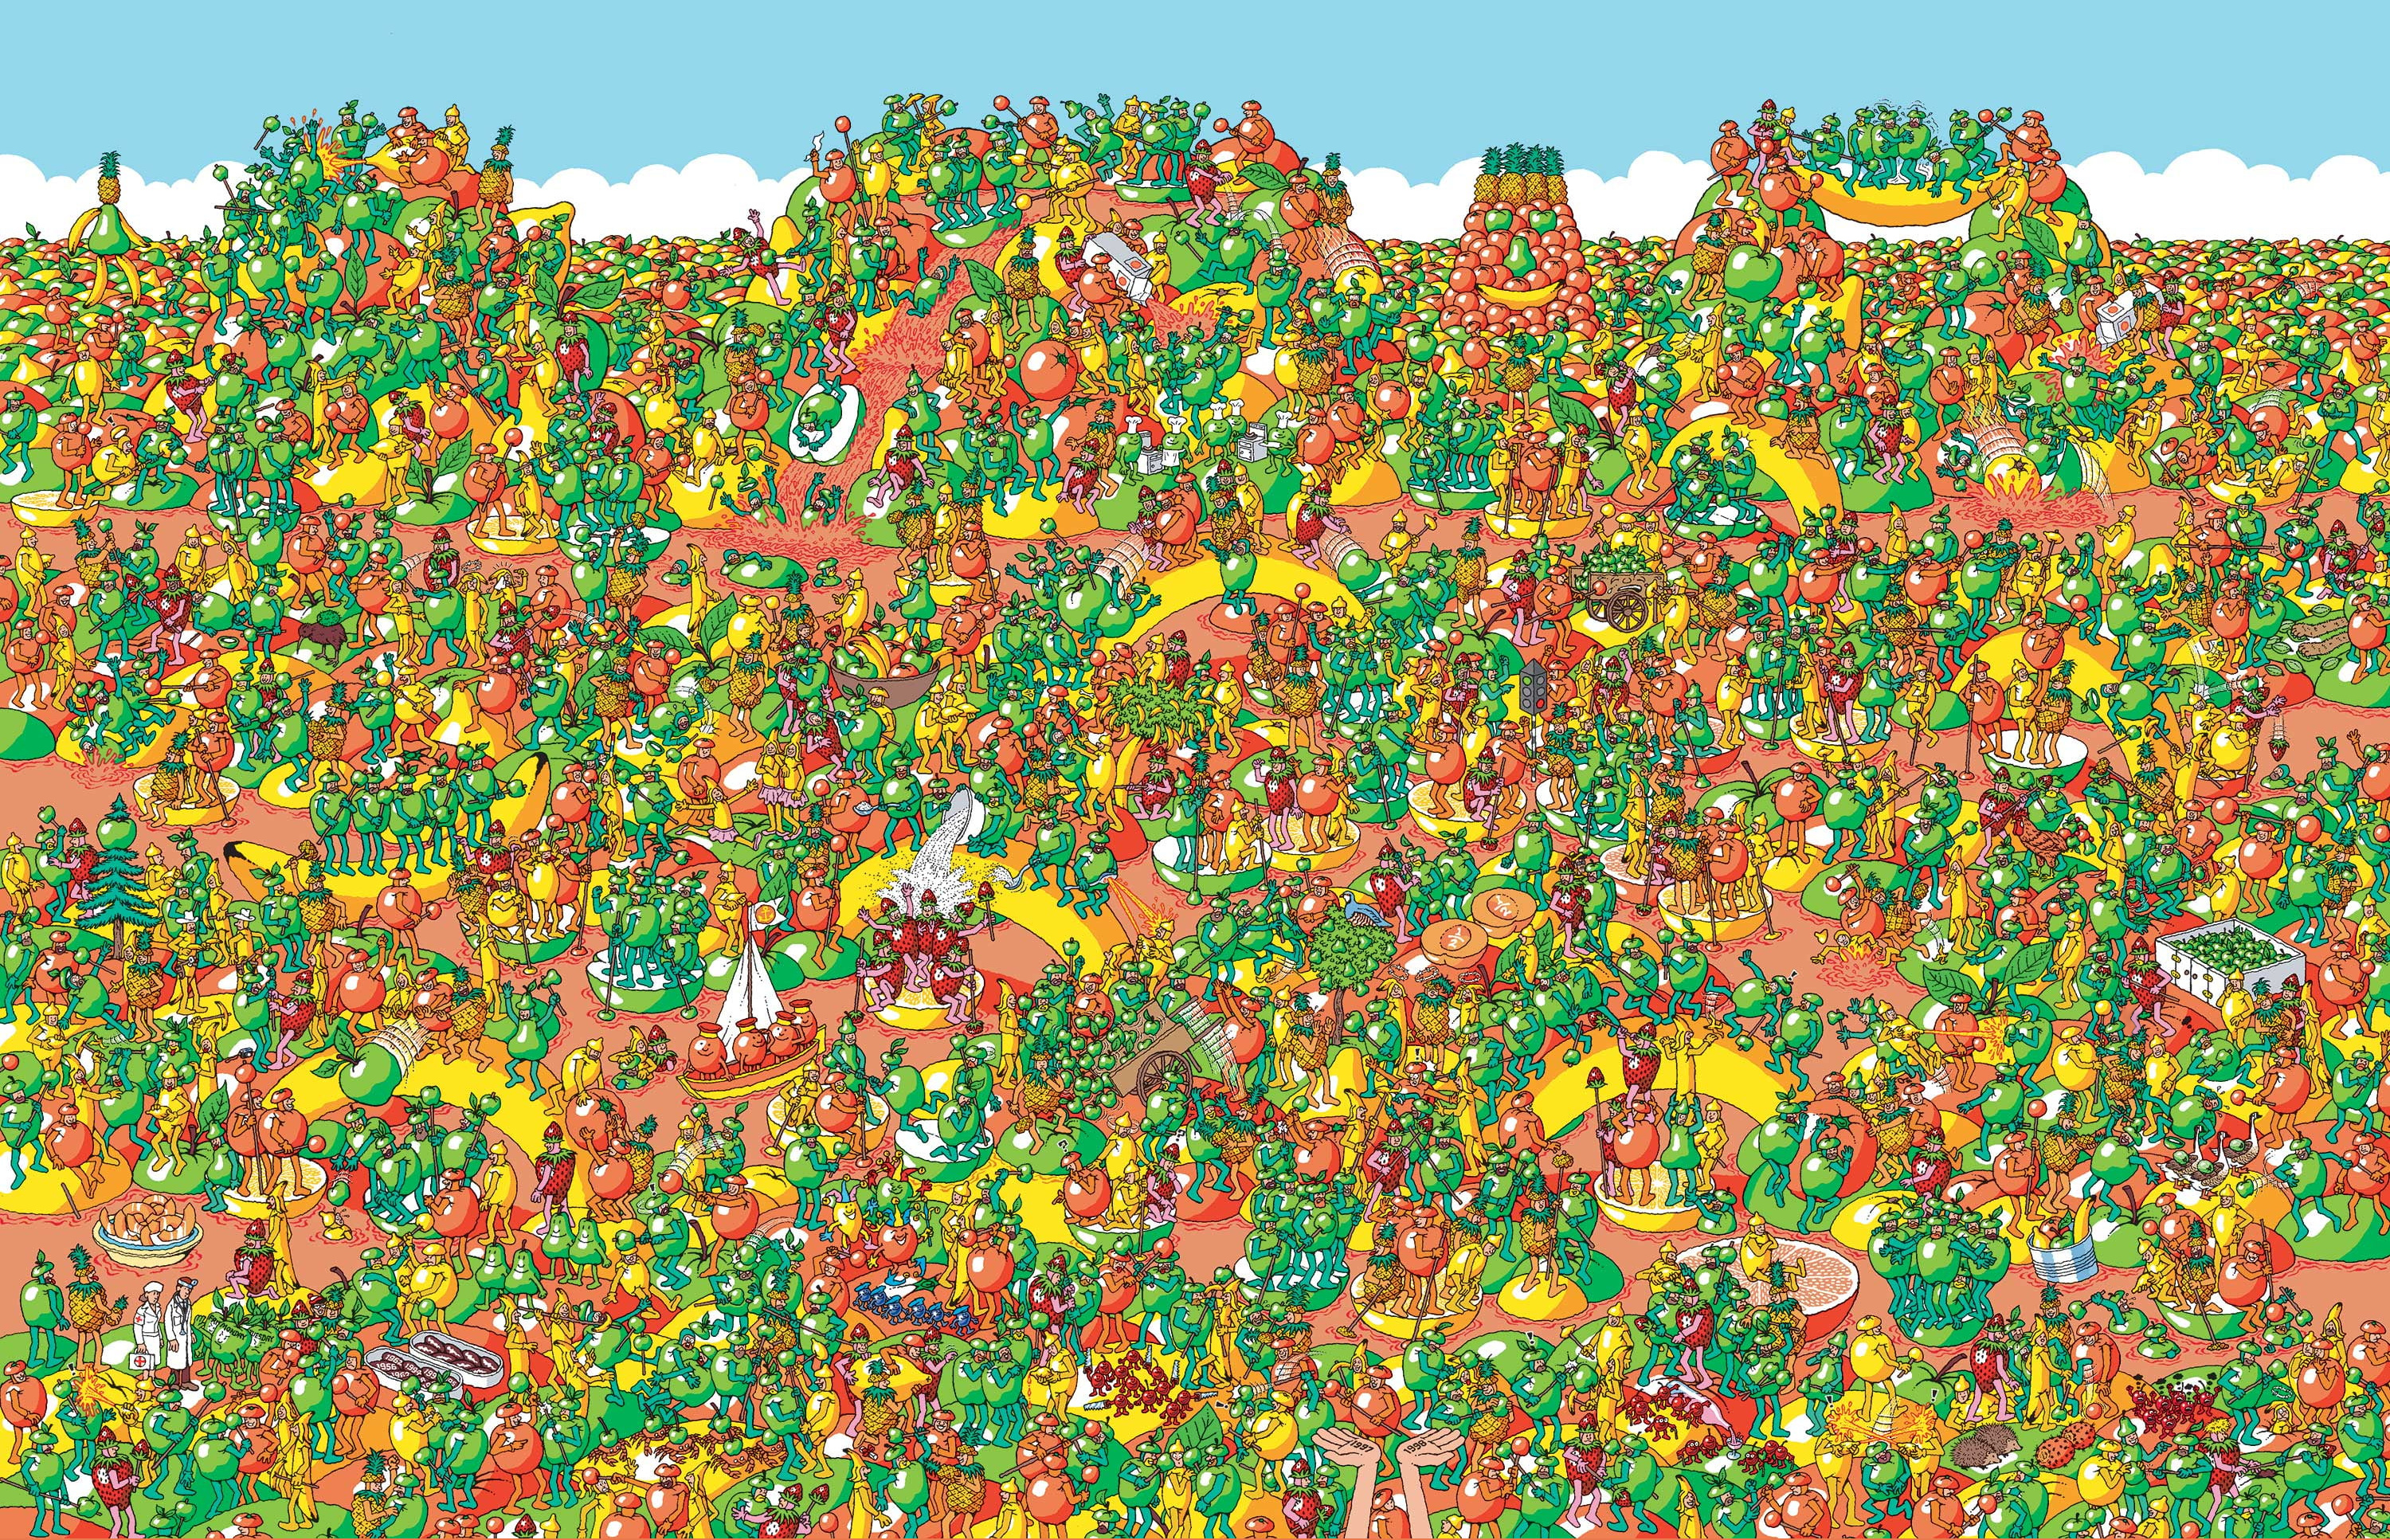 Where's Wally in Fruit